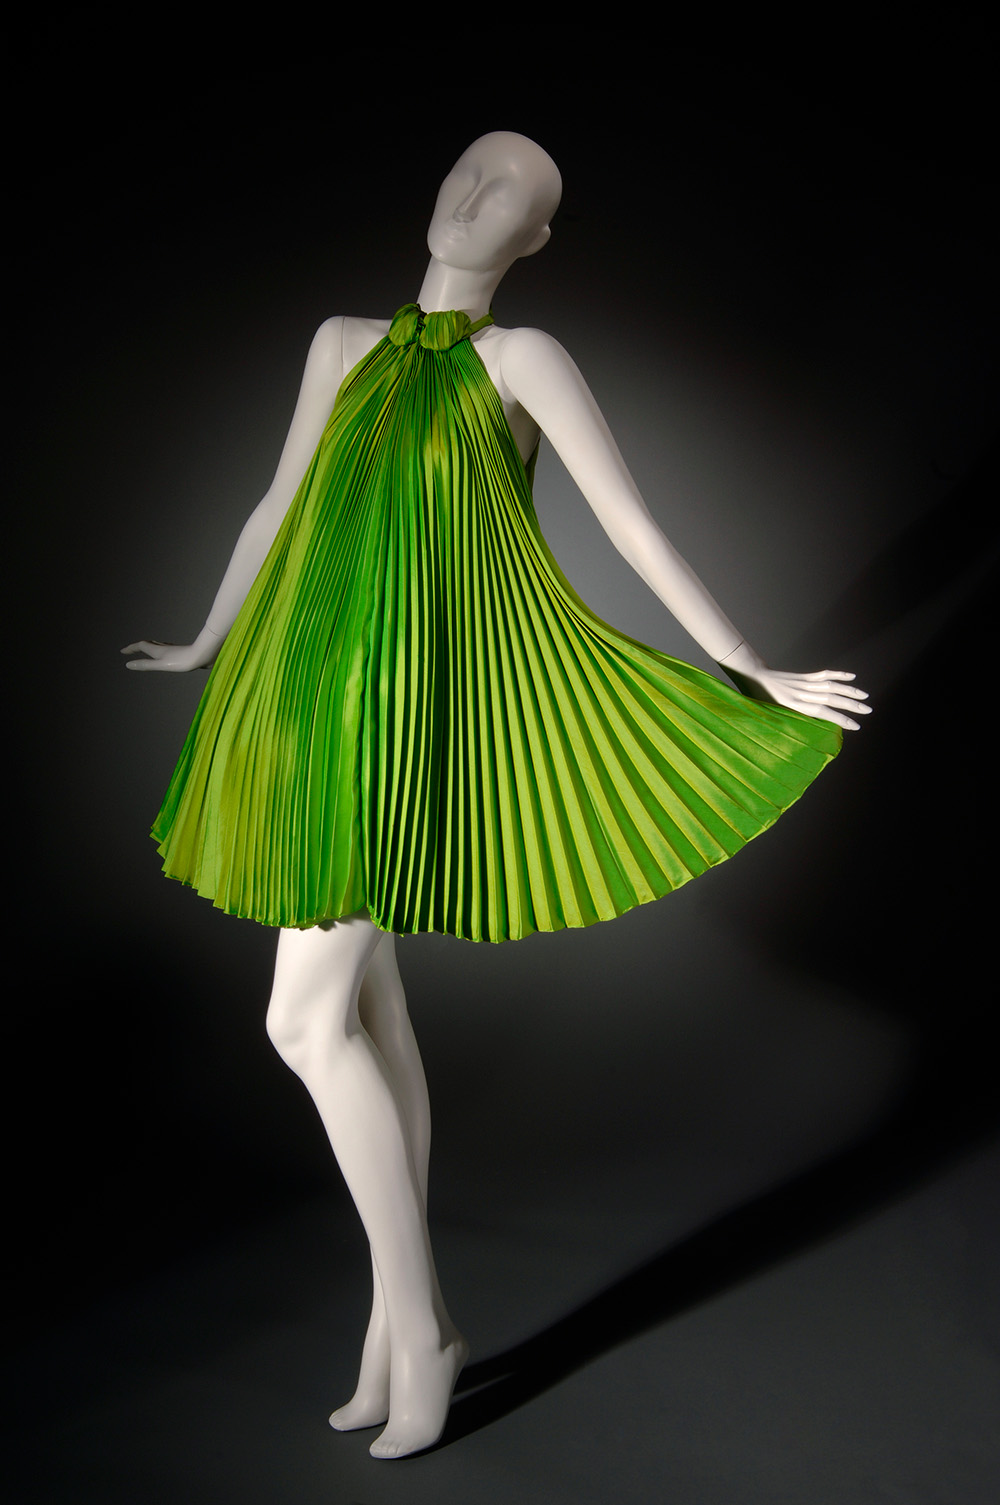 Evelyn Jablow (1919–1997), Fold-Up Dress for a Portable Society, 1964, silk, Museum Purchase, 2006.15